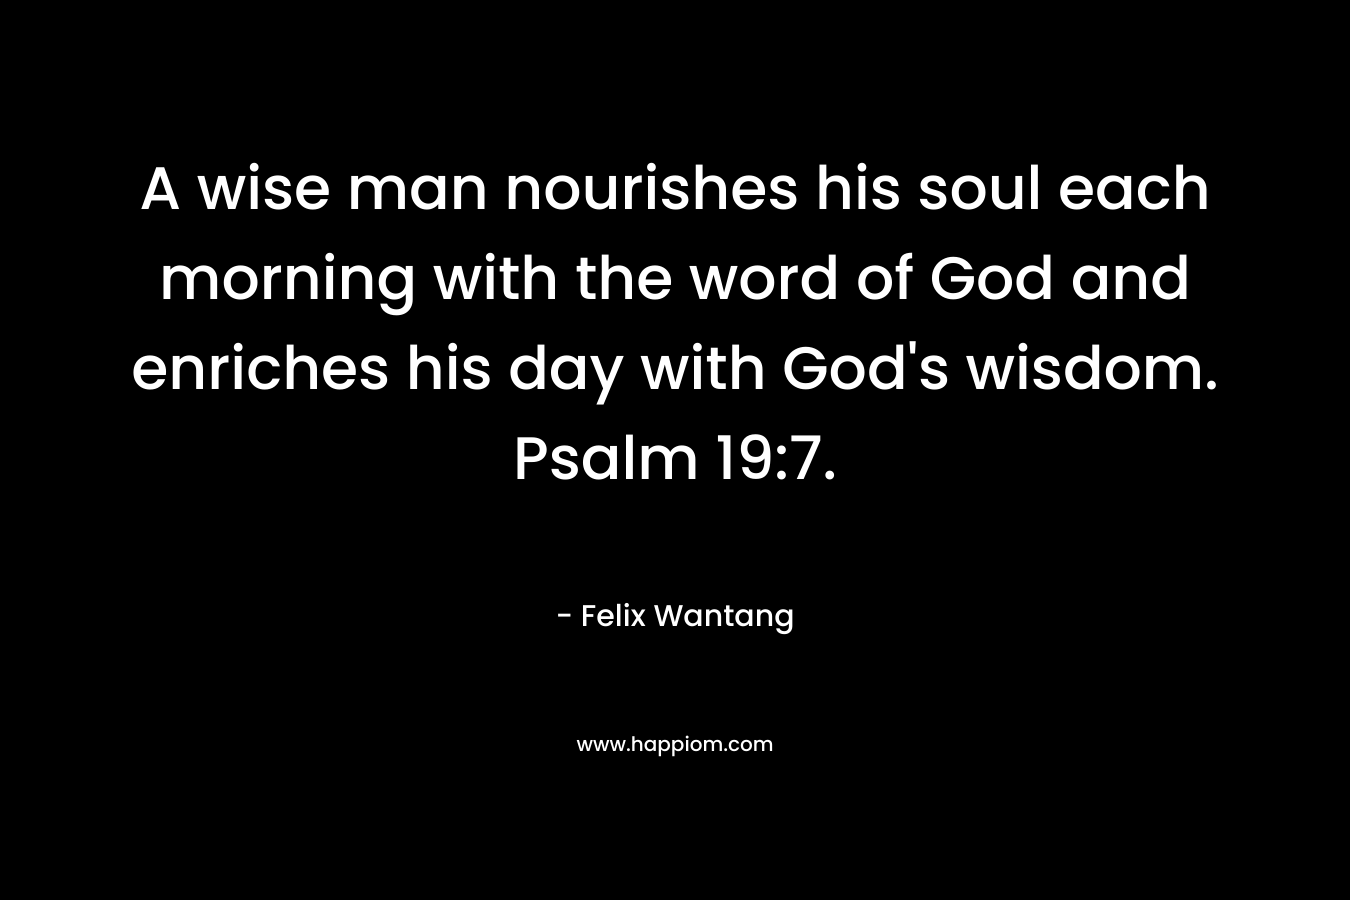 A wise man nourishes his soul each morning with the word of God and enriches his day with God's wisdom. Psalm 19:7.